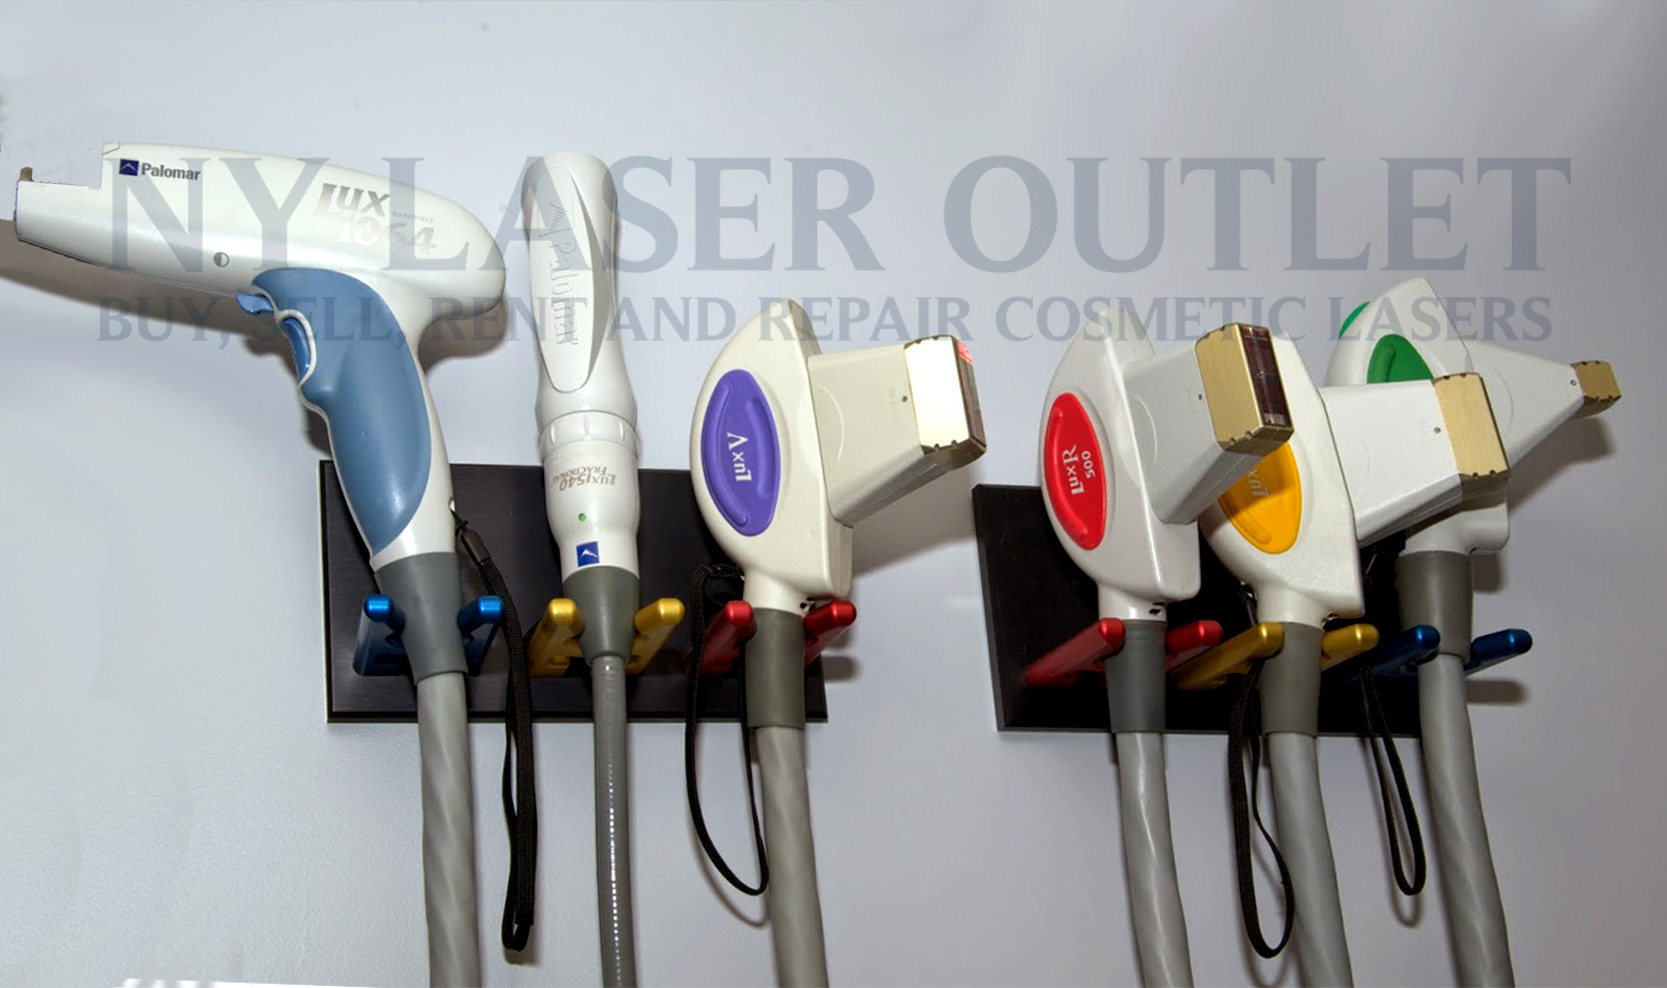 Refurbished Cosmetic Laser and IPL Hand Pieces